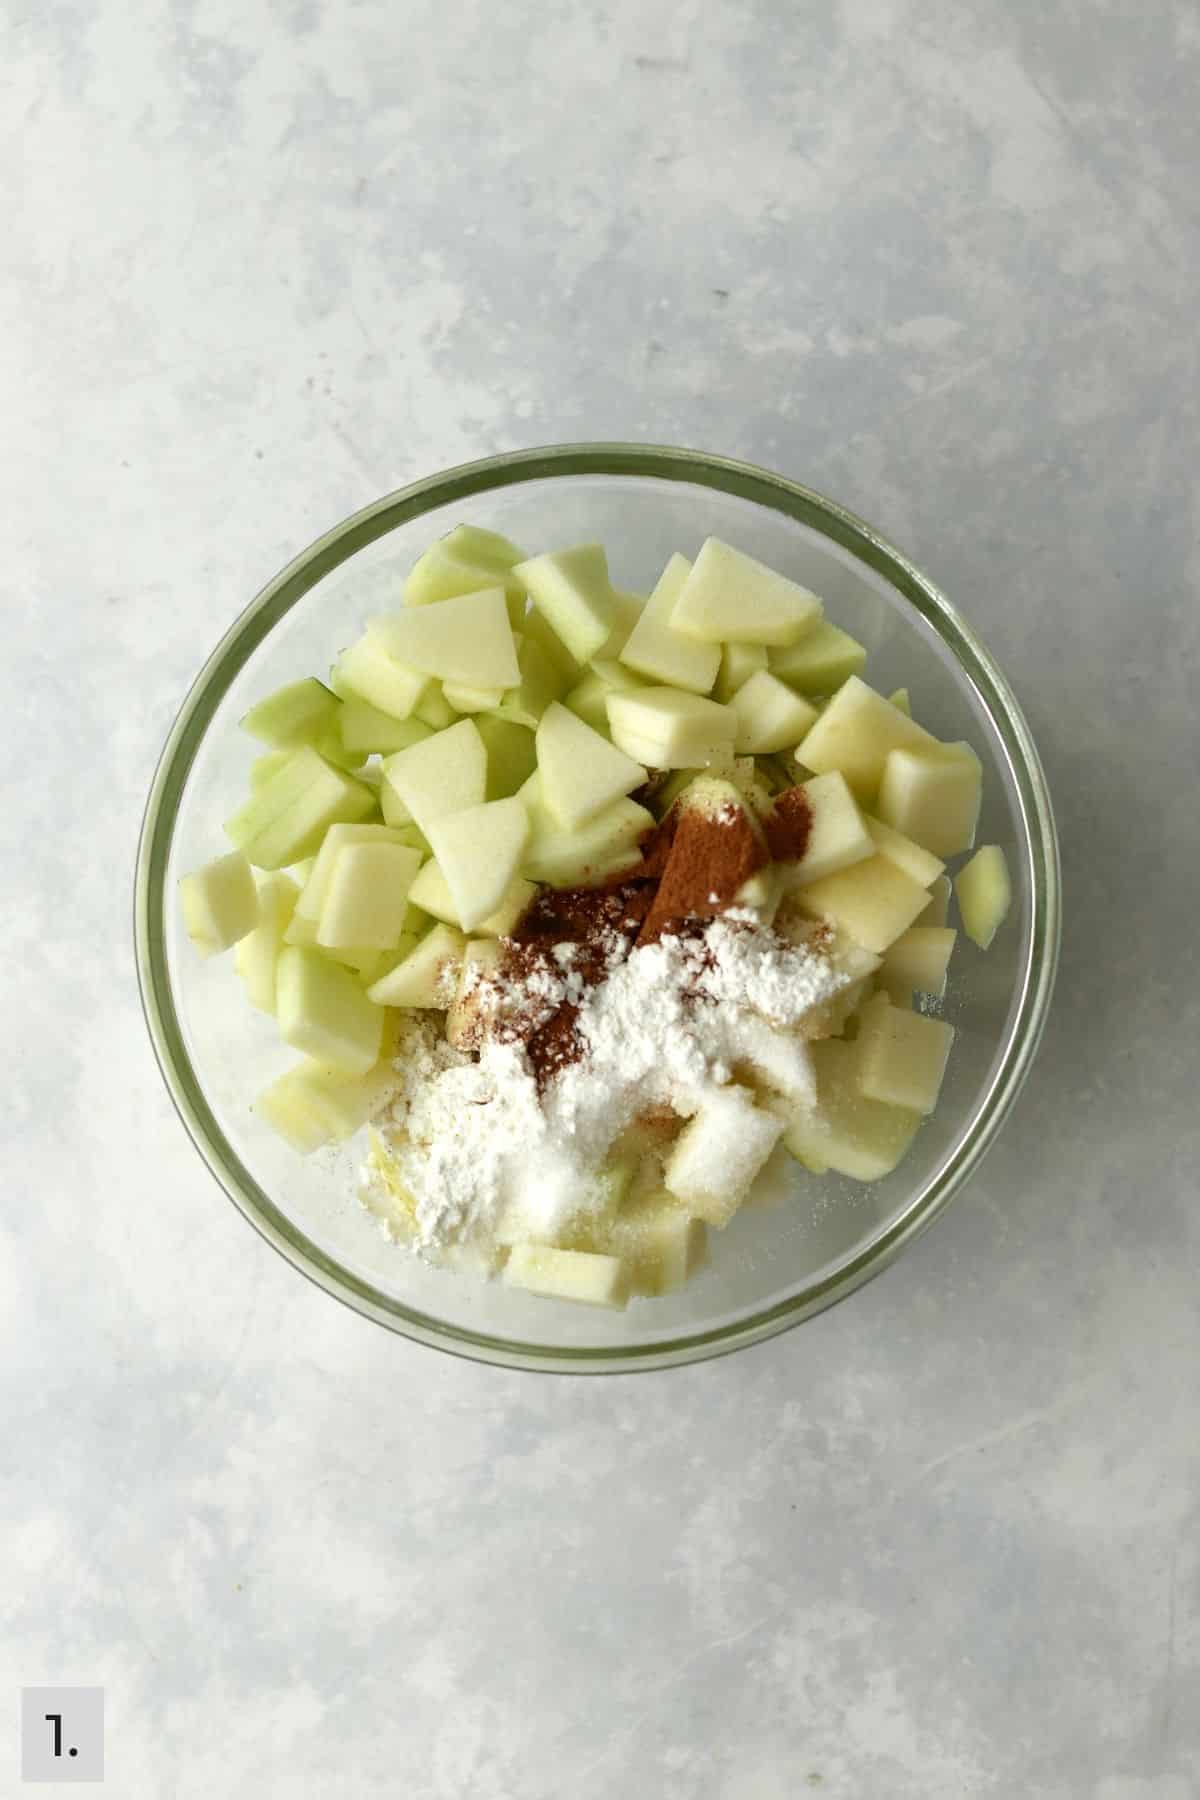 small apple pieces with cinnamon and sugar.